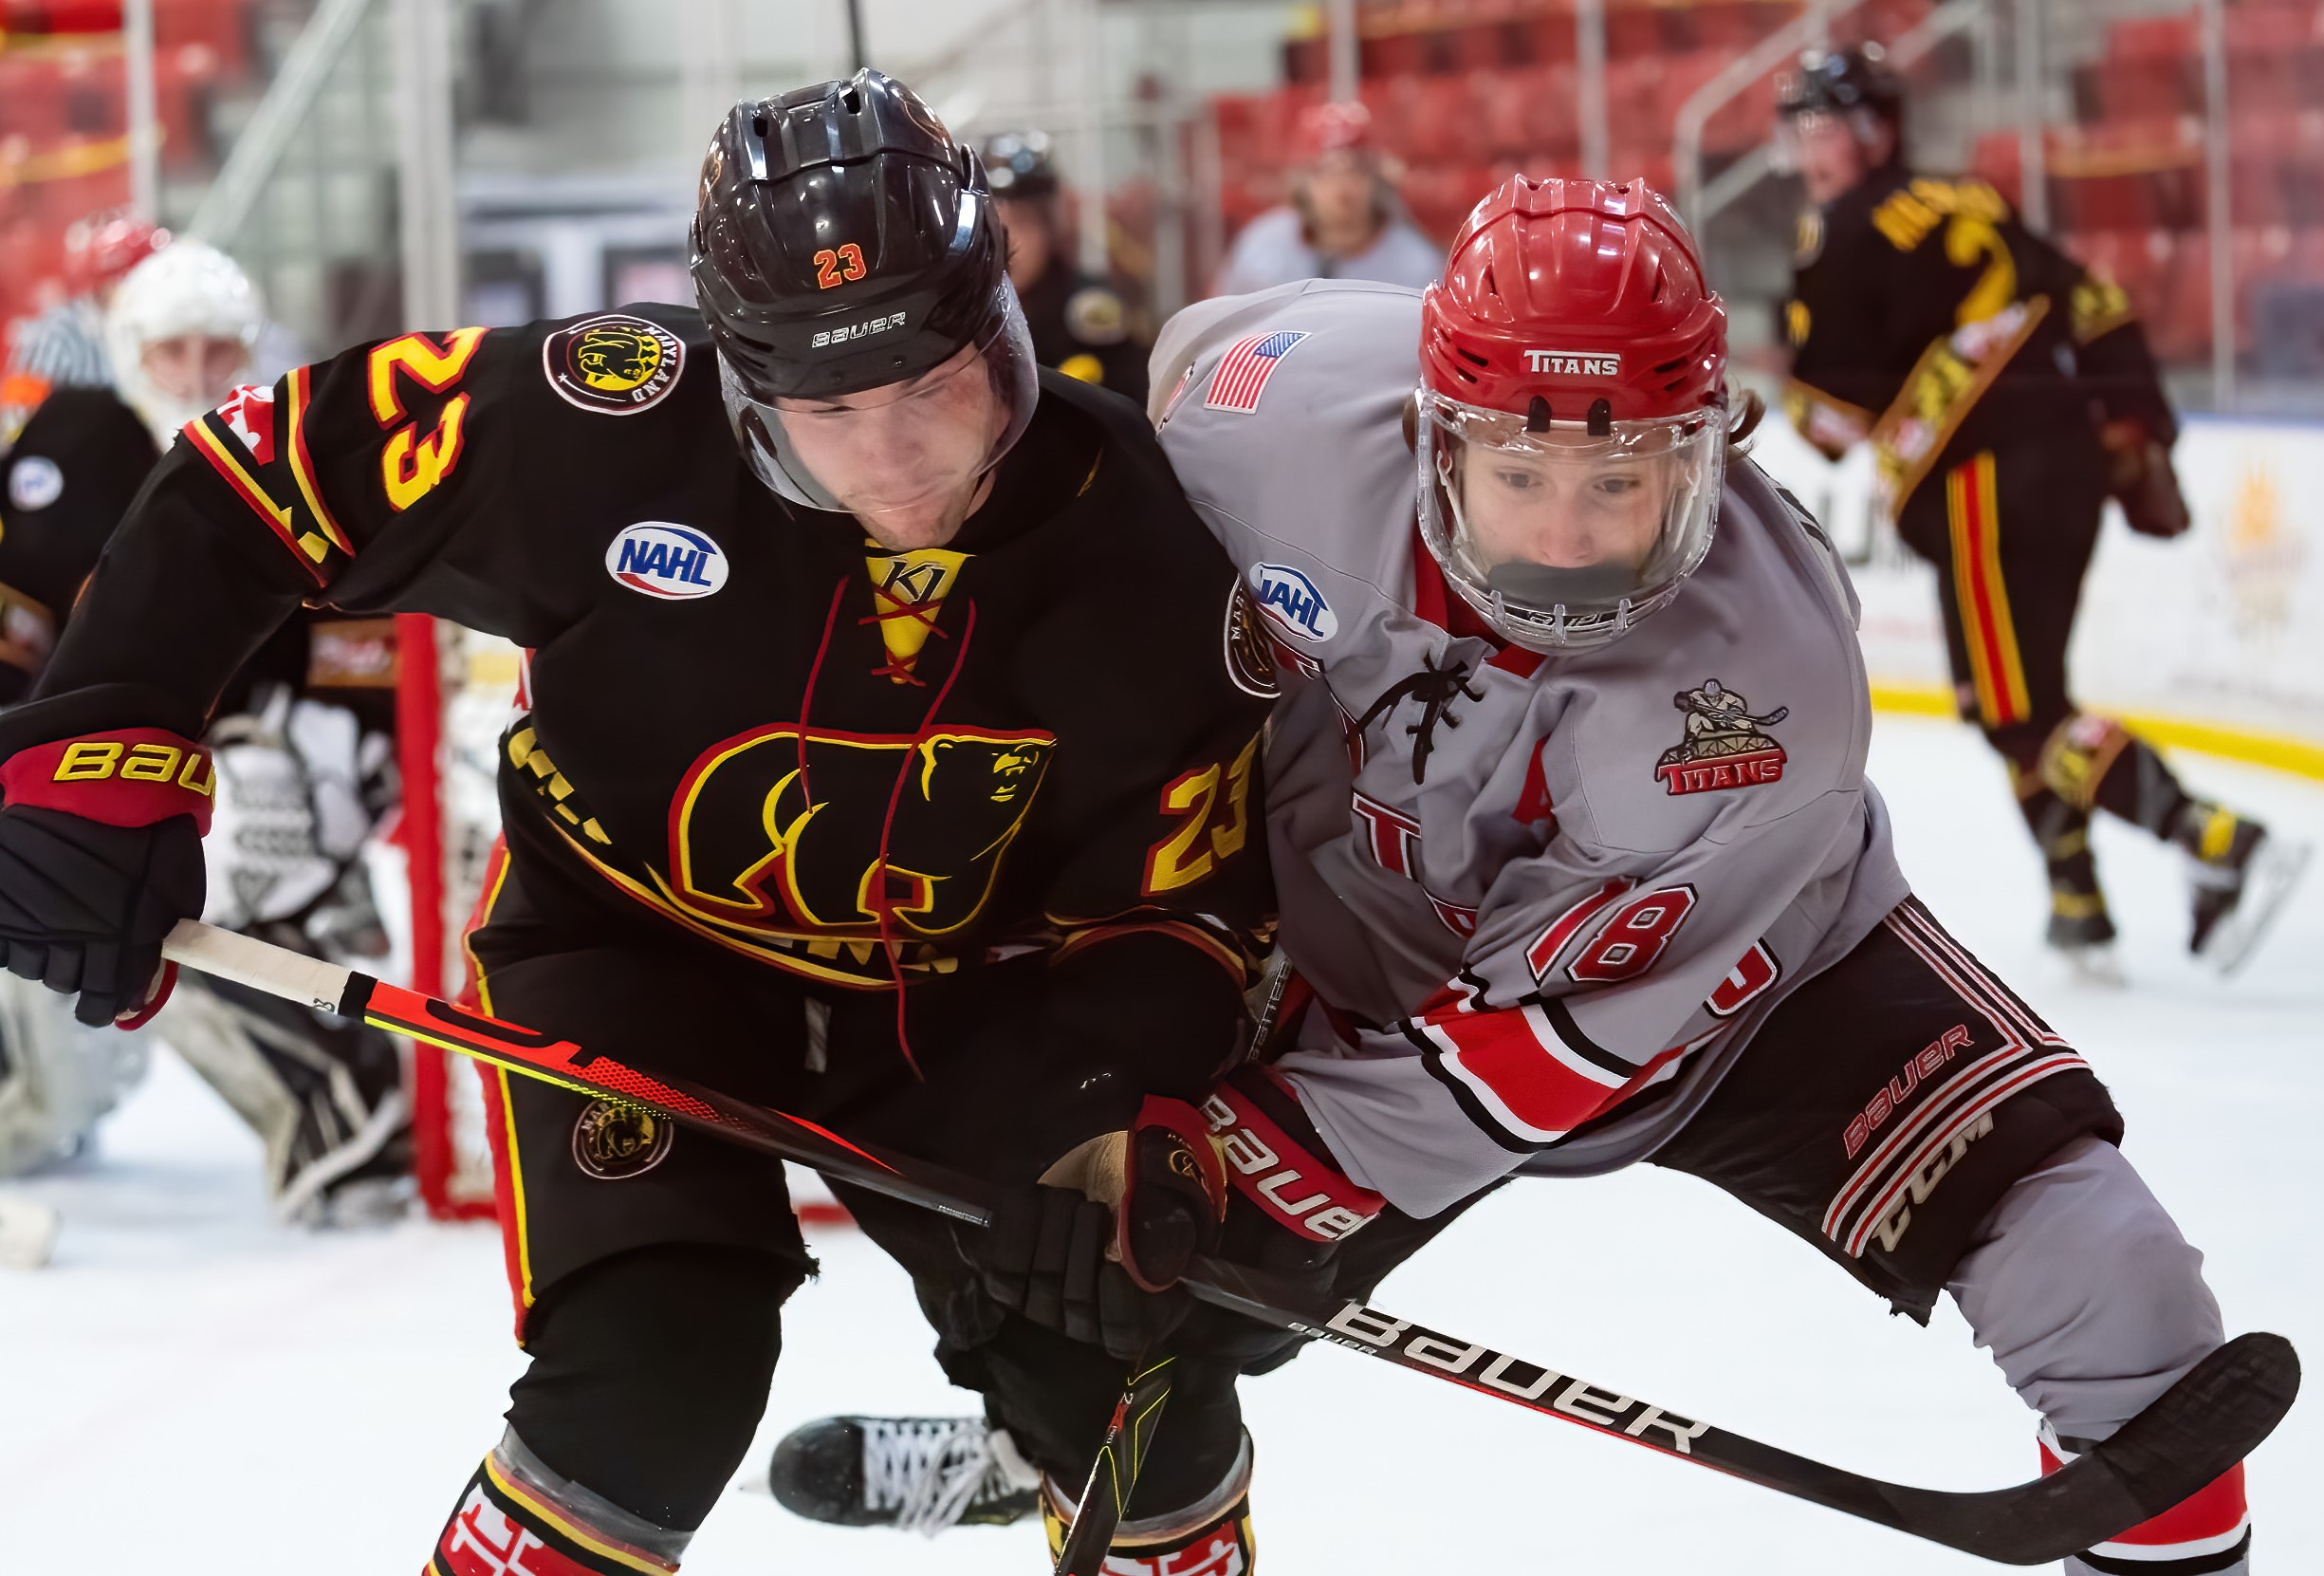 Third period dooms Titans in 5 – 2 loss to Black Bears